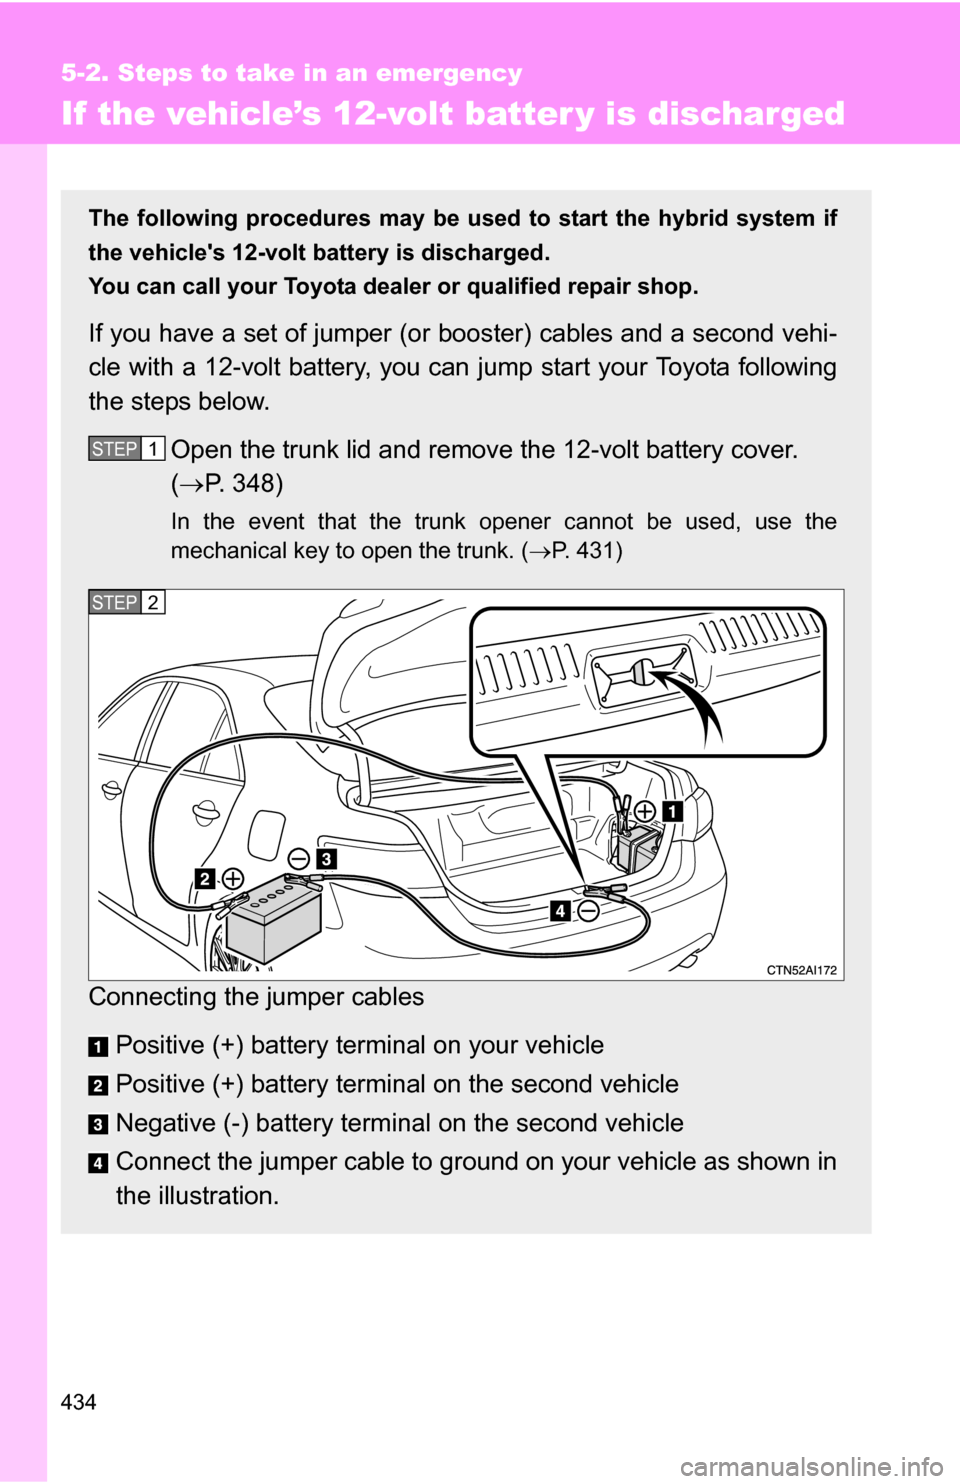 TOYOTA CAMRY HYBRID 2010 XV40 / 8.G Owners Manual 434
5-2. Steps to take in an emergency
If the vehicle’s 12-volt batter y is discharged
The following procedures may be used to start the hybrid system if
the vehicles 12-volt battery is discharged.